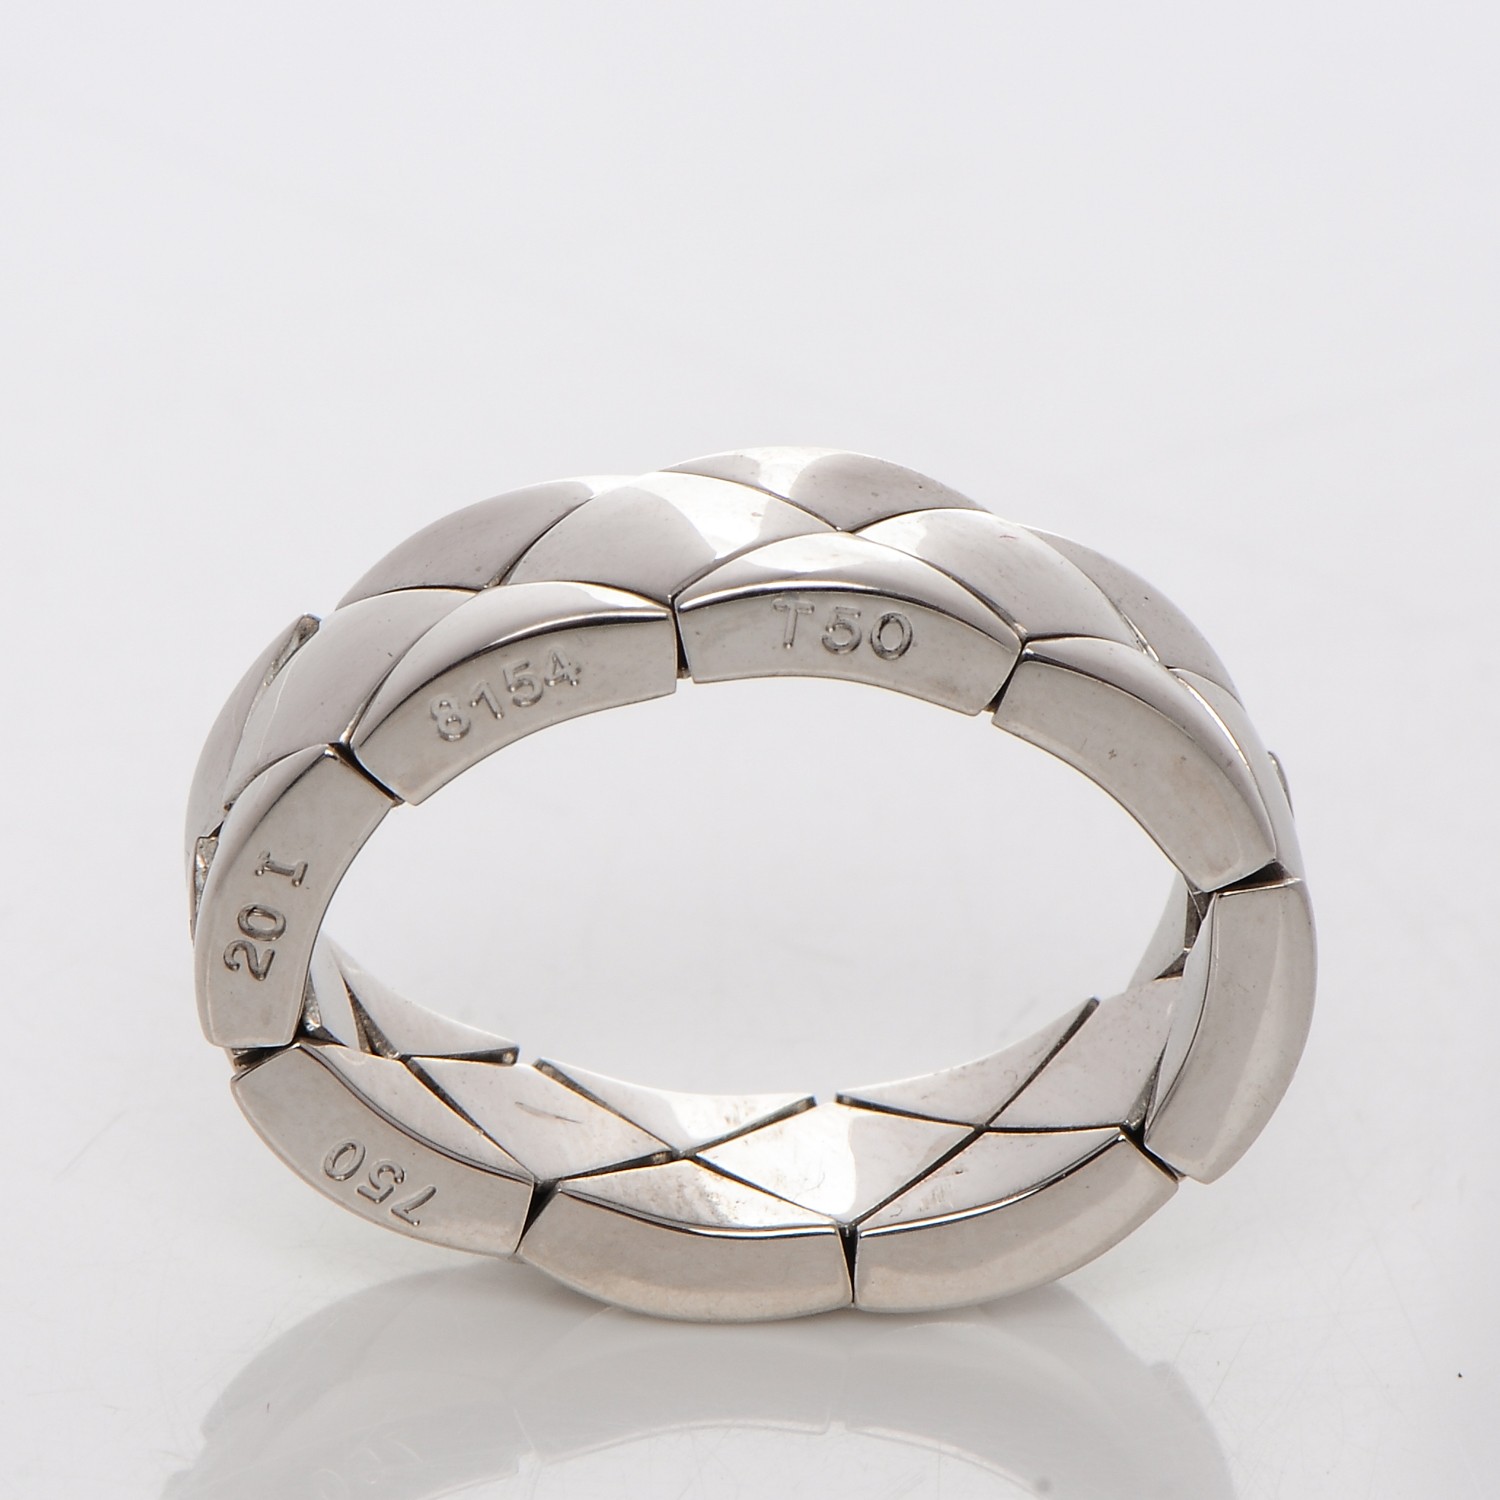 CHANEL 18K White Gold Small Coco Crush Ring 6 200052